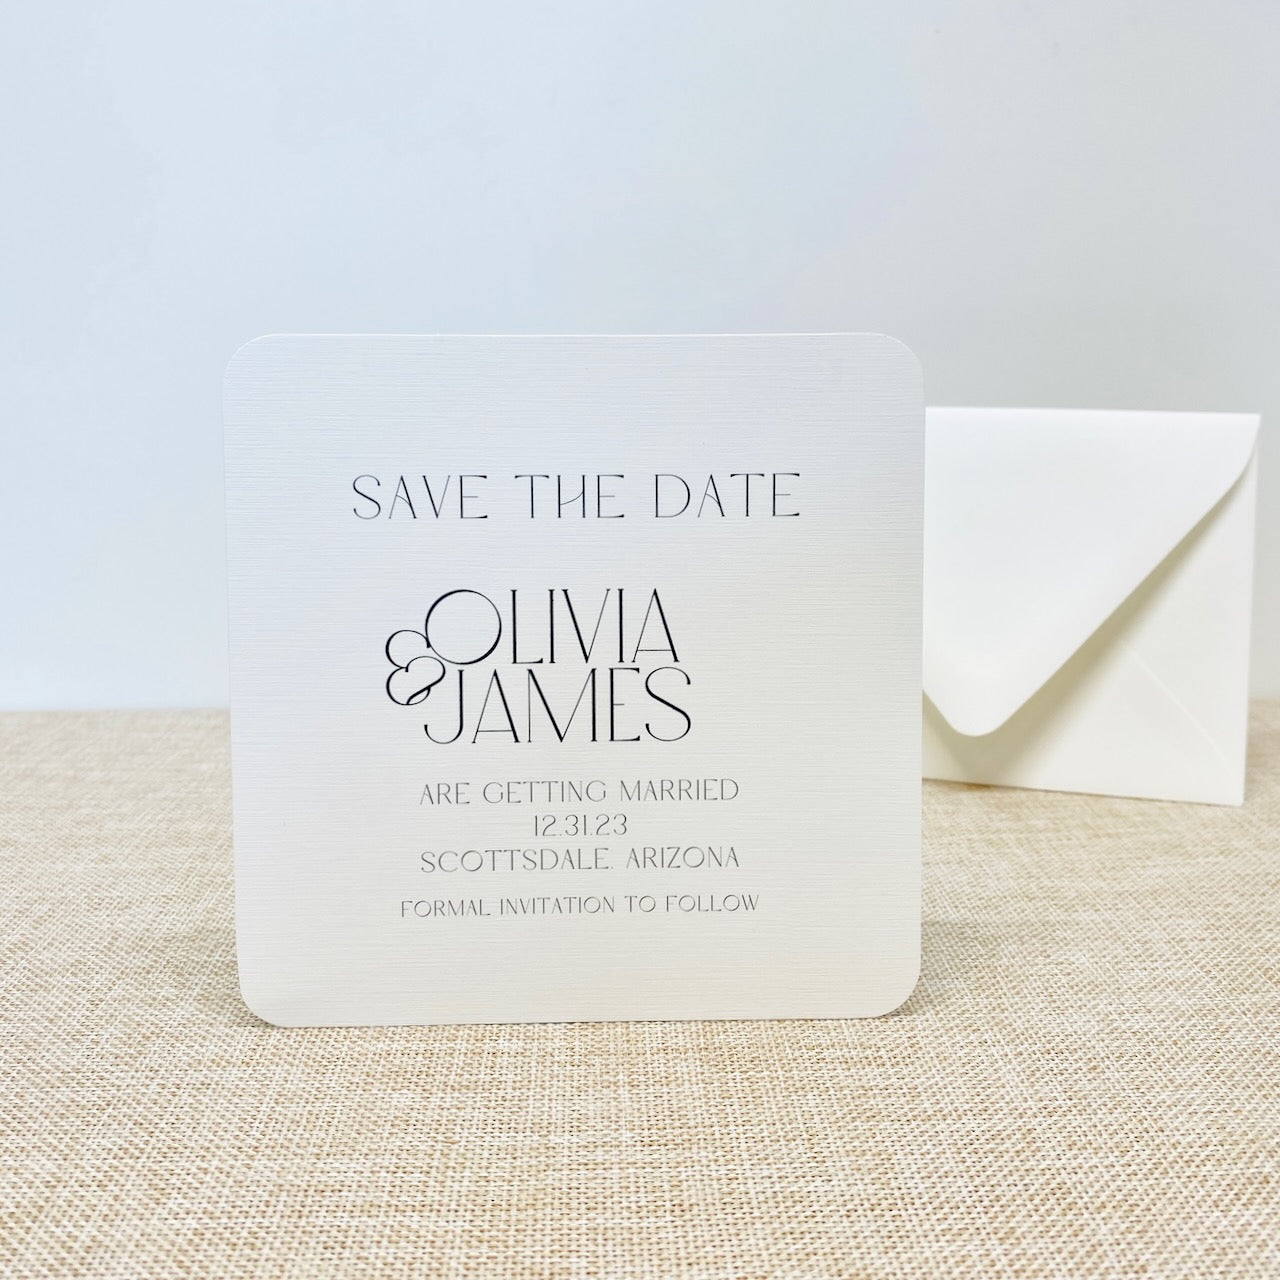 Black and White Save The Date Cards for Weddings, Square Save The Date Cards with Envelopes